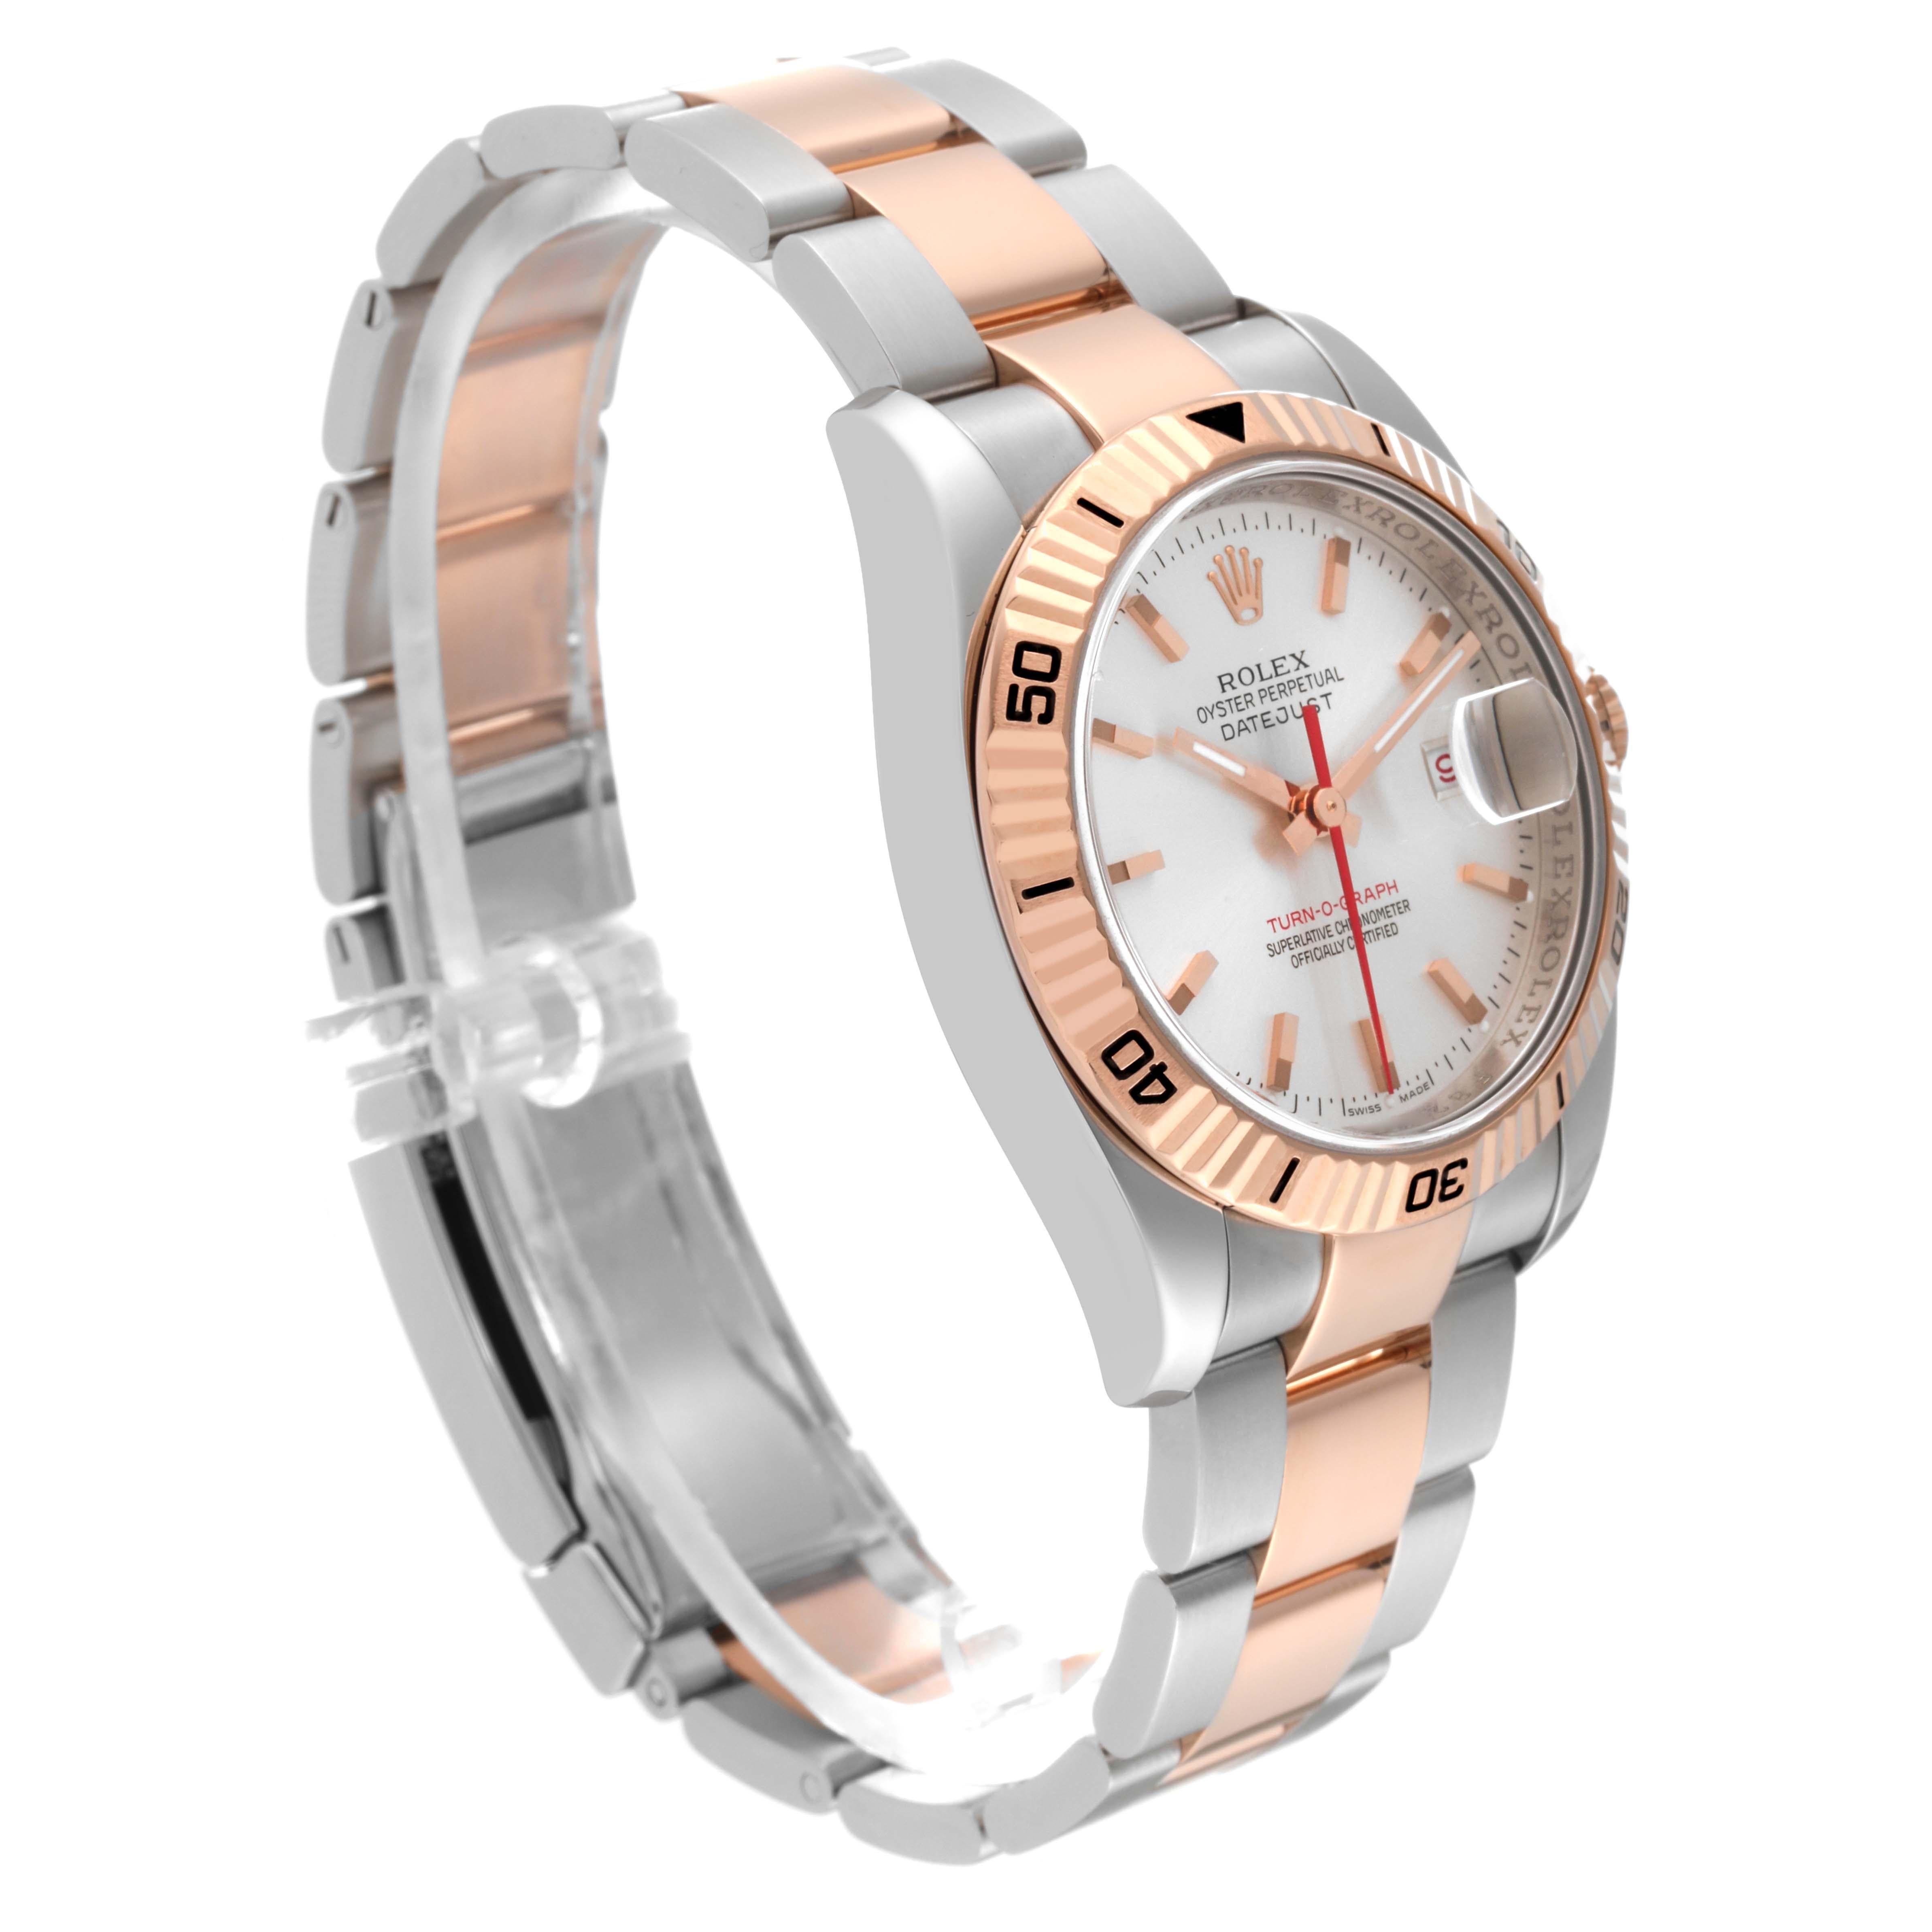 Rolex Datejust Turnograph Steel Rose Gold Mens Watch 116261 For Sale 6